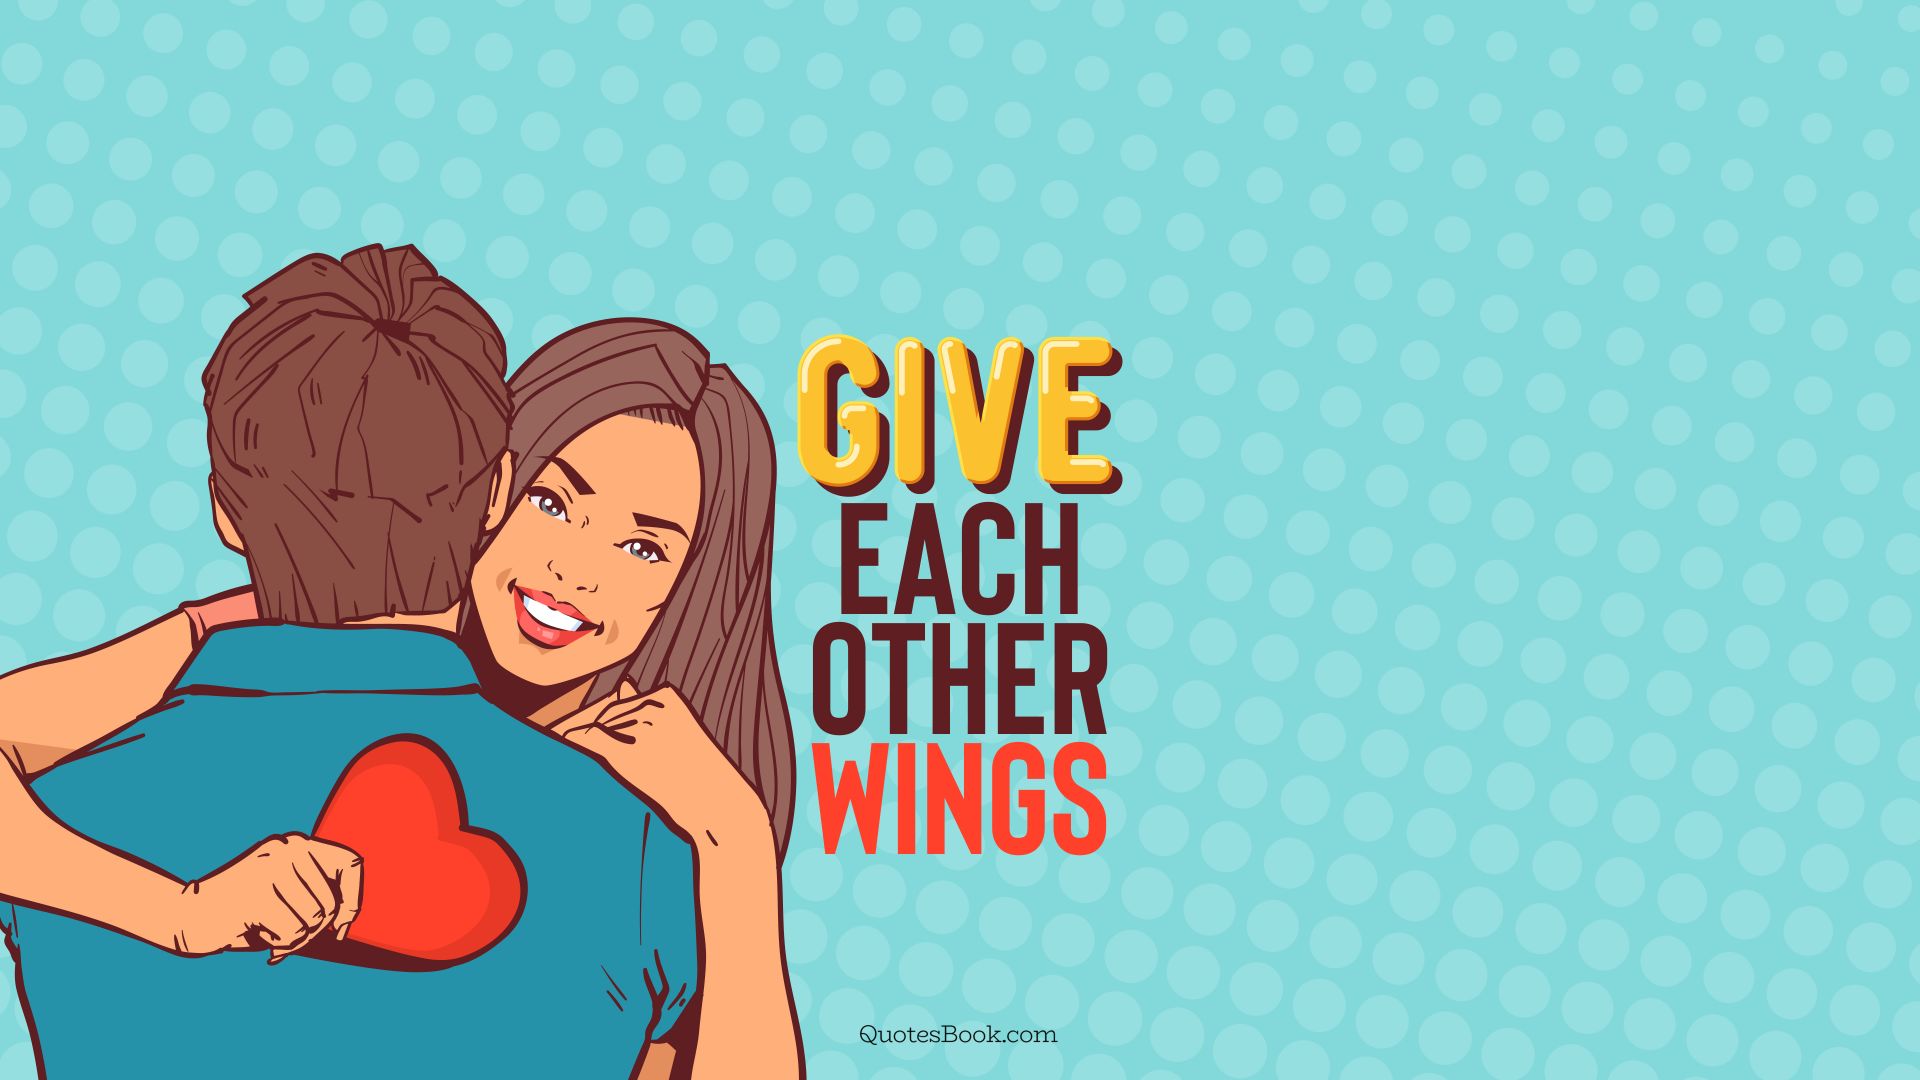 Give each other wings. - Quote by QuotesBook